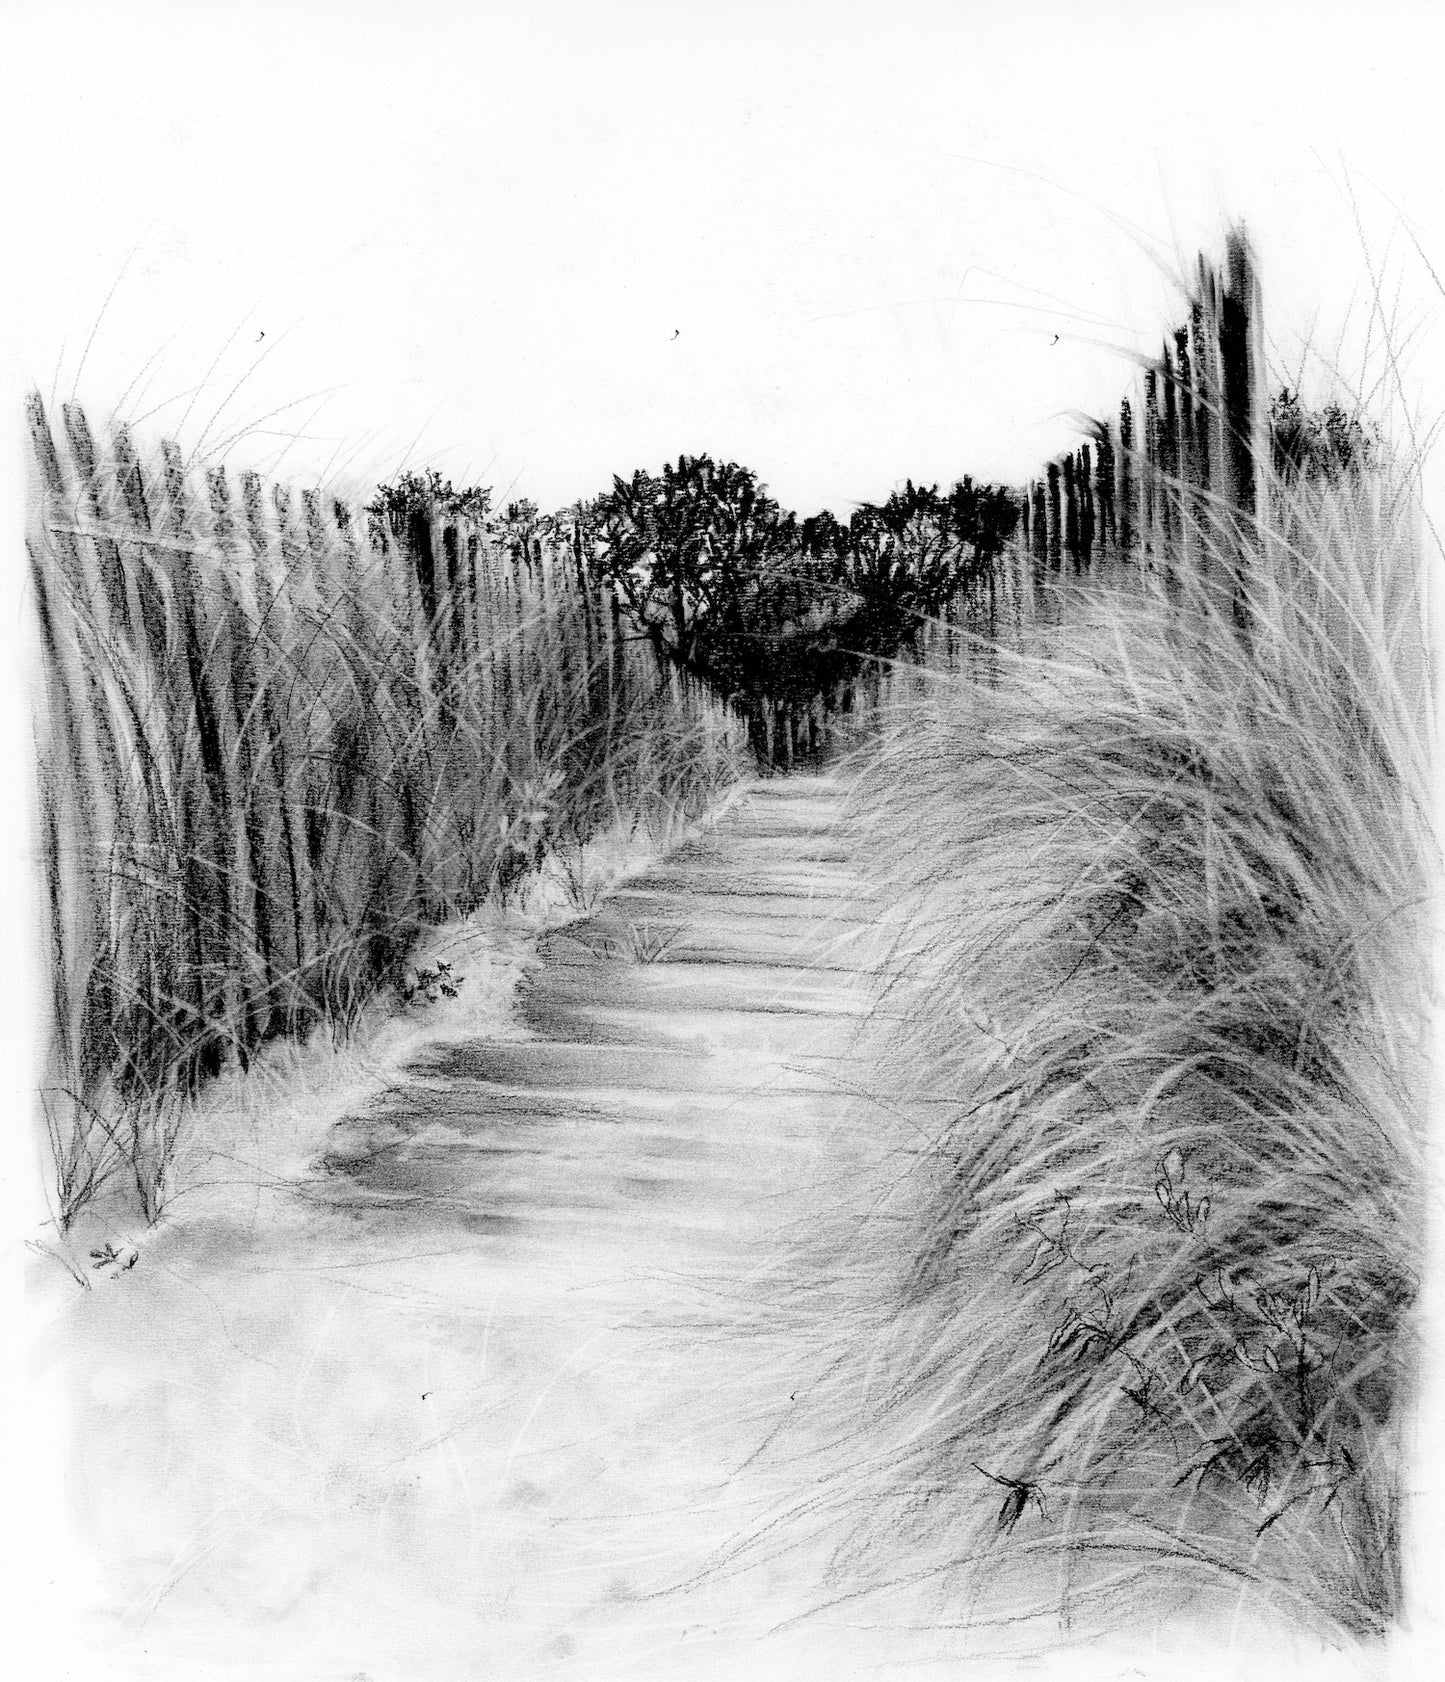 Casco Boardwalk | 16x20 | CHARCOAL AND CHALK ON PAPER | 22-56